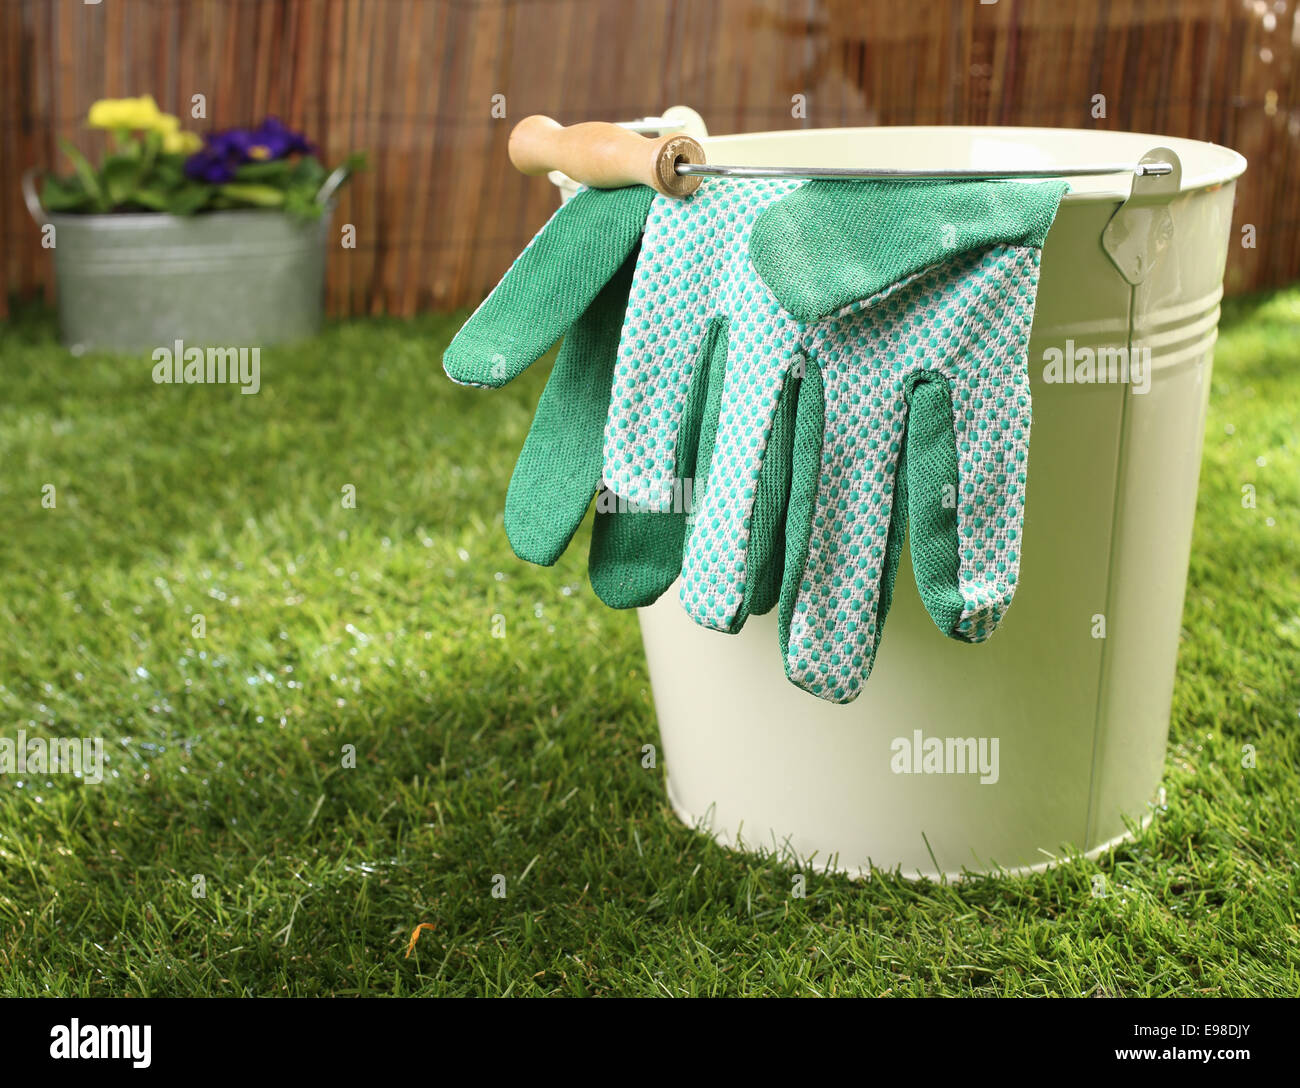 Green textile gardening gloves hanging over the rim of a metal bucket standing on a green lawn in summer sunshine, conceptual image Stock Photo